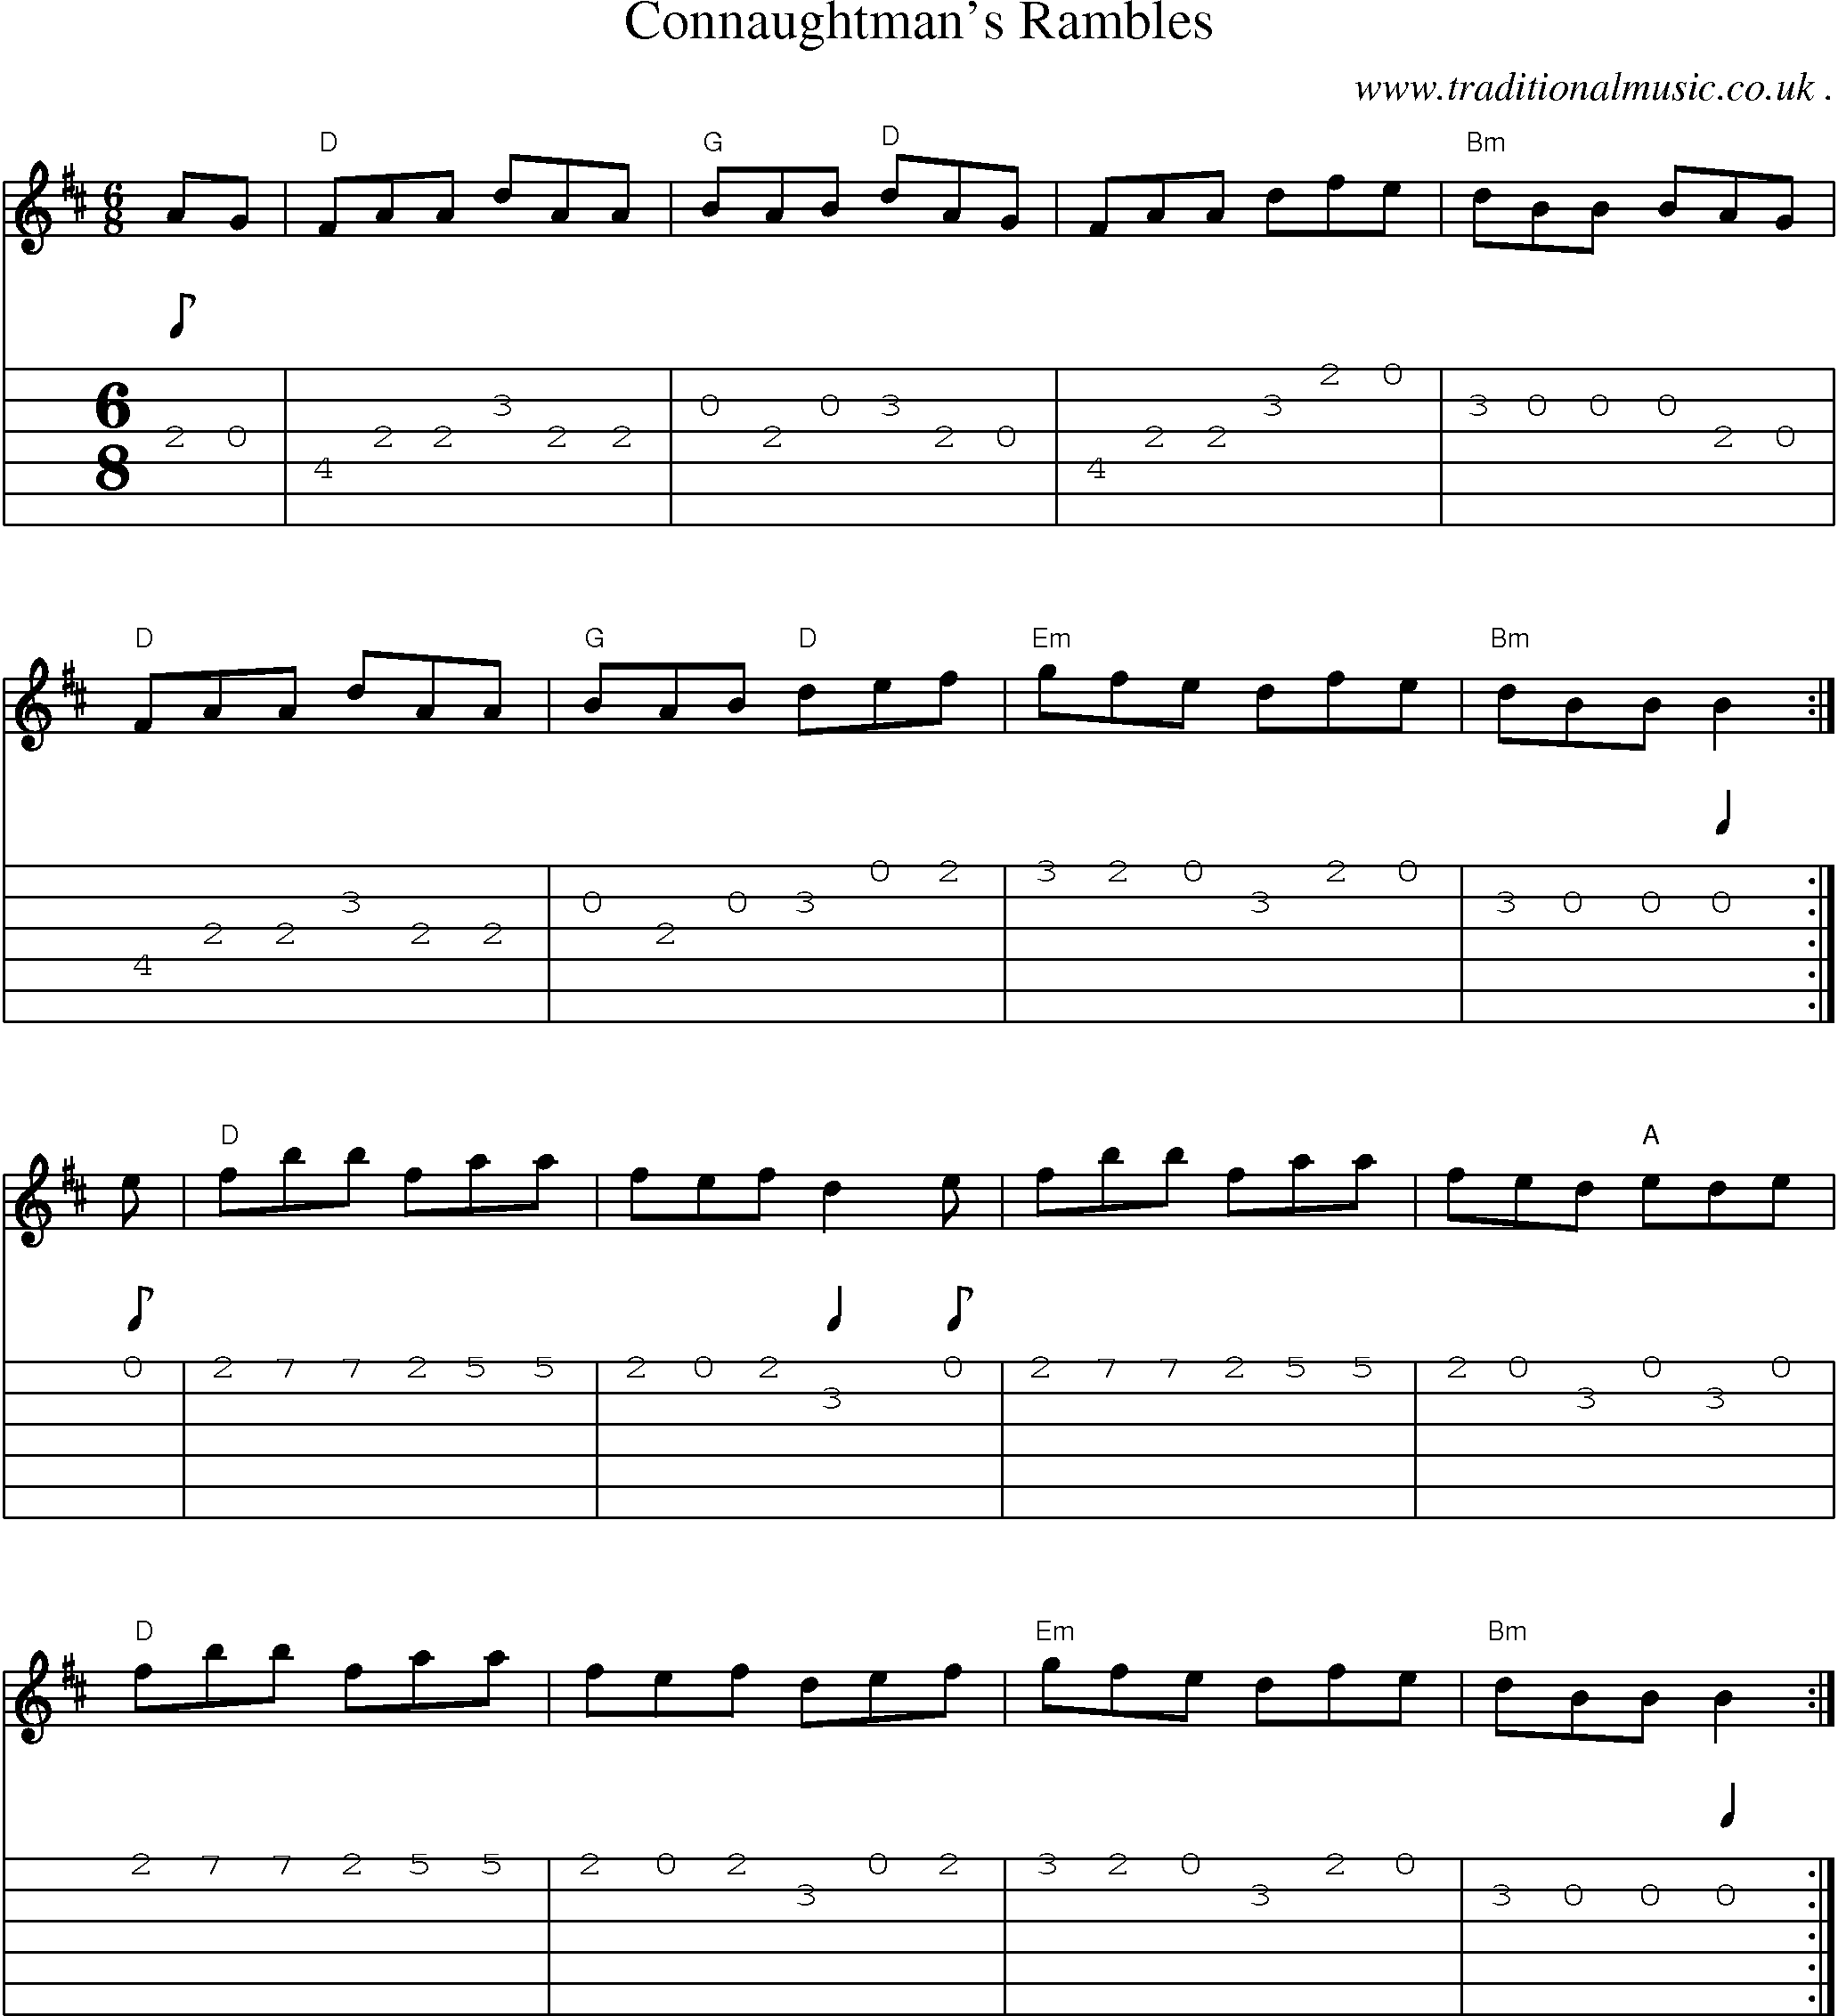 Music Score and Guitar Tabs for Connaughtmans Rambles